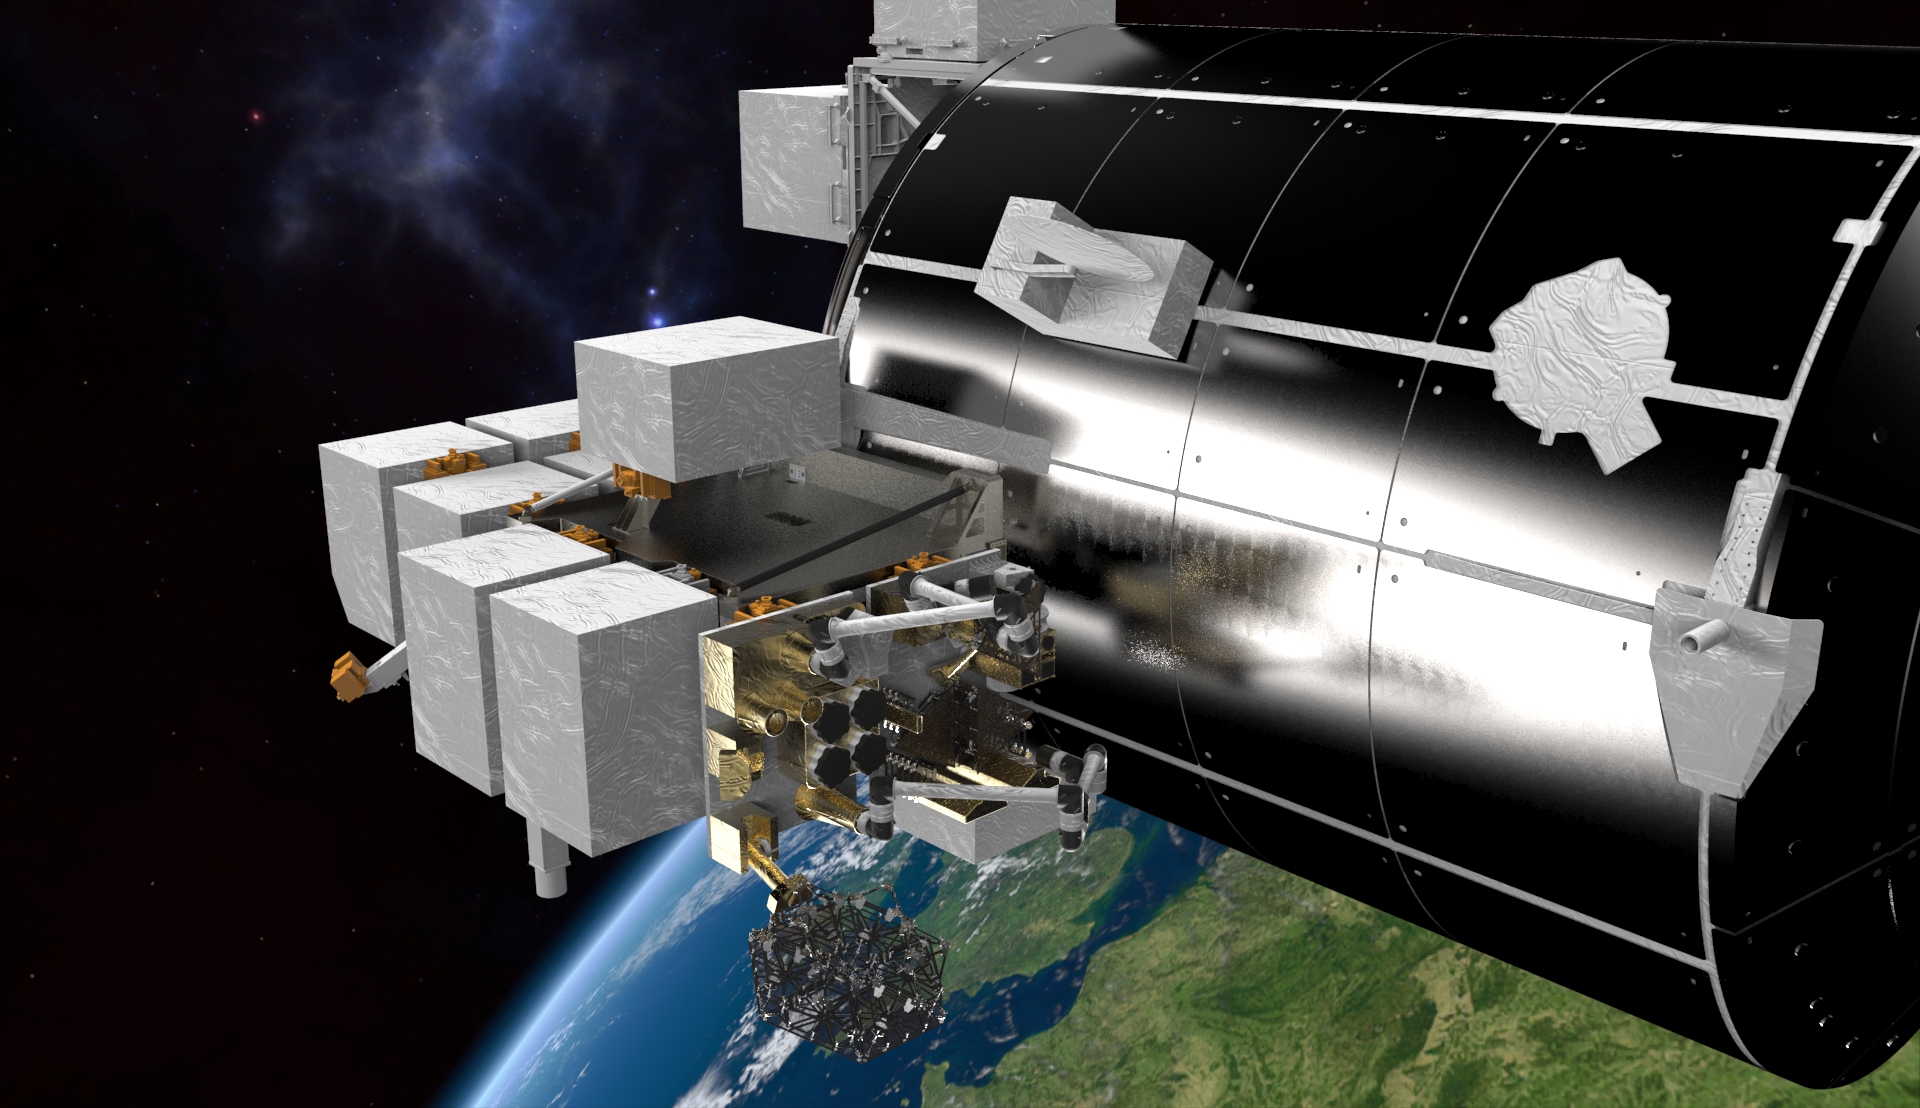 Rendered image of the envisioned orbital factory attached on the Bartolomeo platform